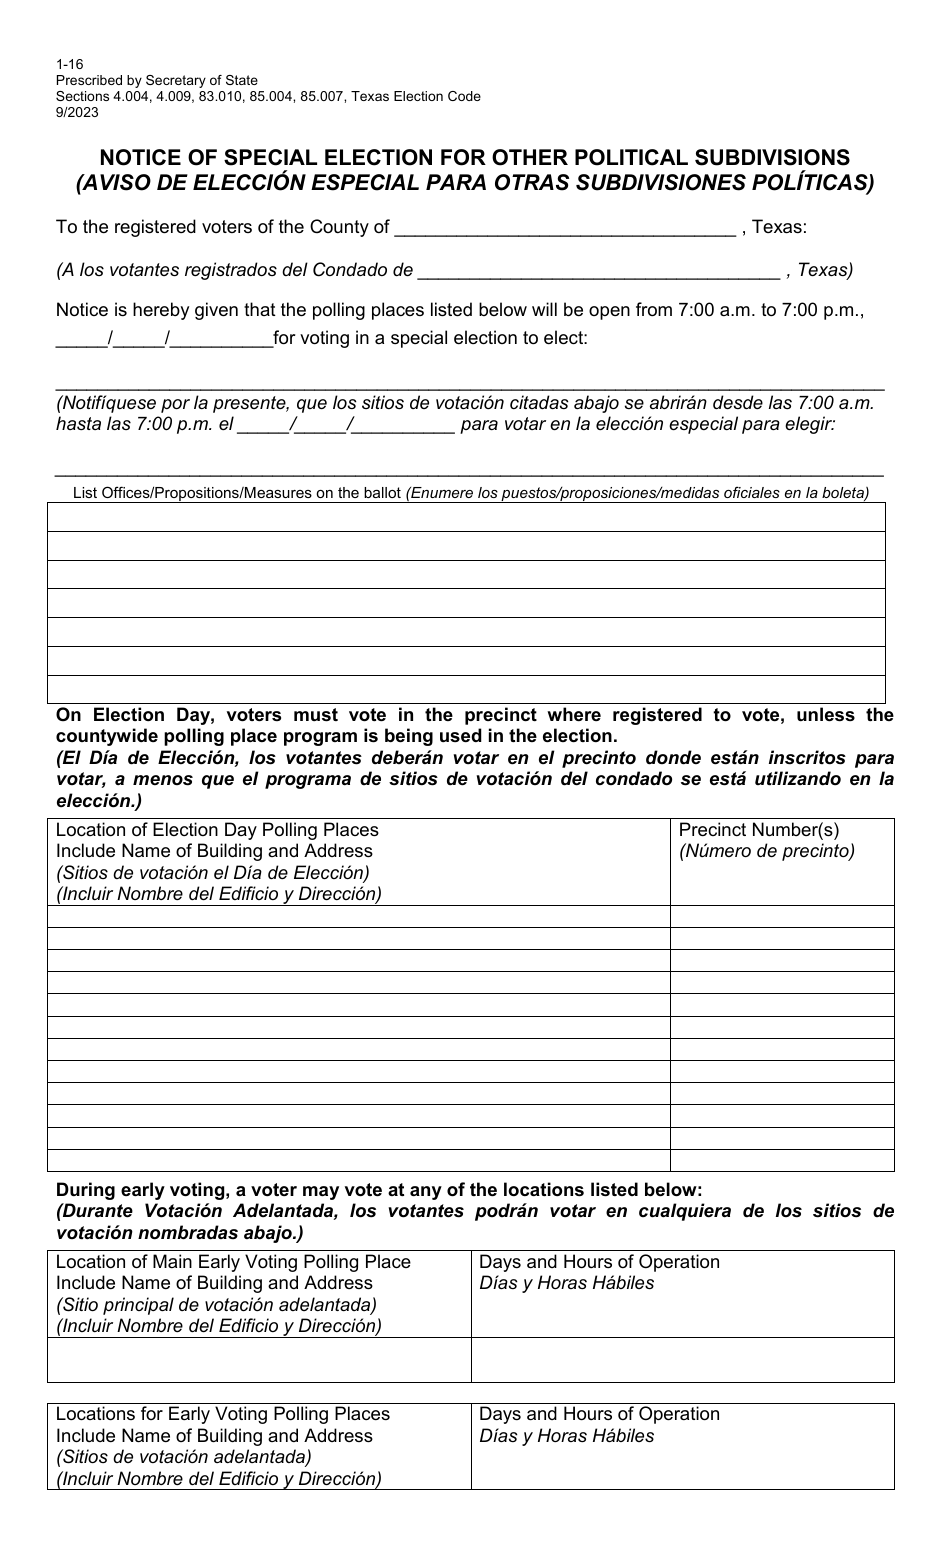 Form 1-16 Notice of Special Election (Cities, Schools, and Other Political Subdivisions) - Texas (English / Spanish), Page 1